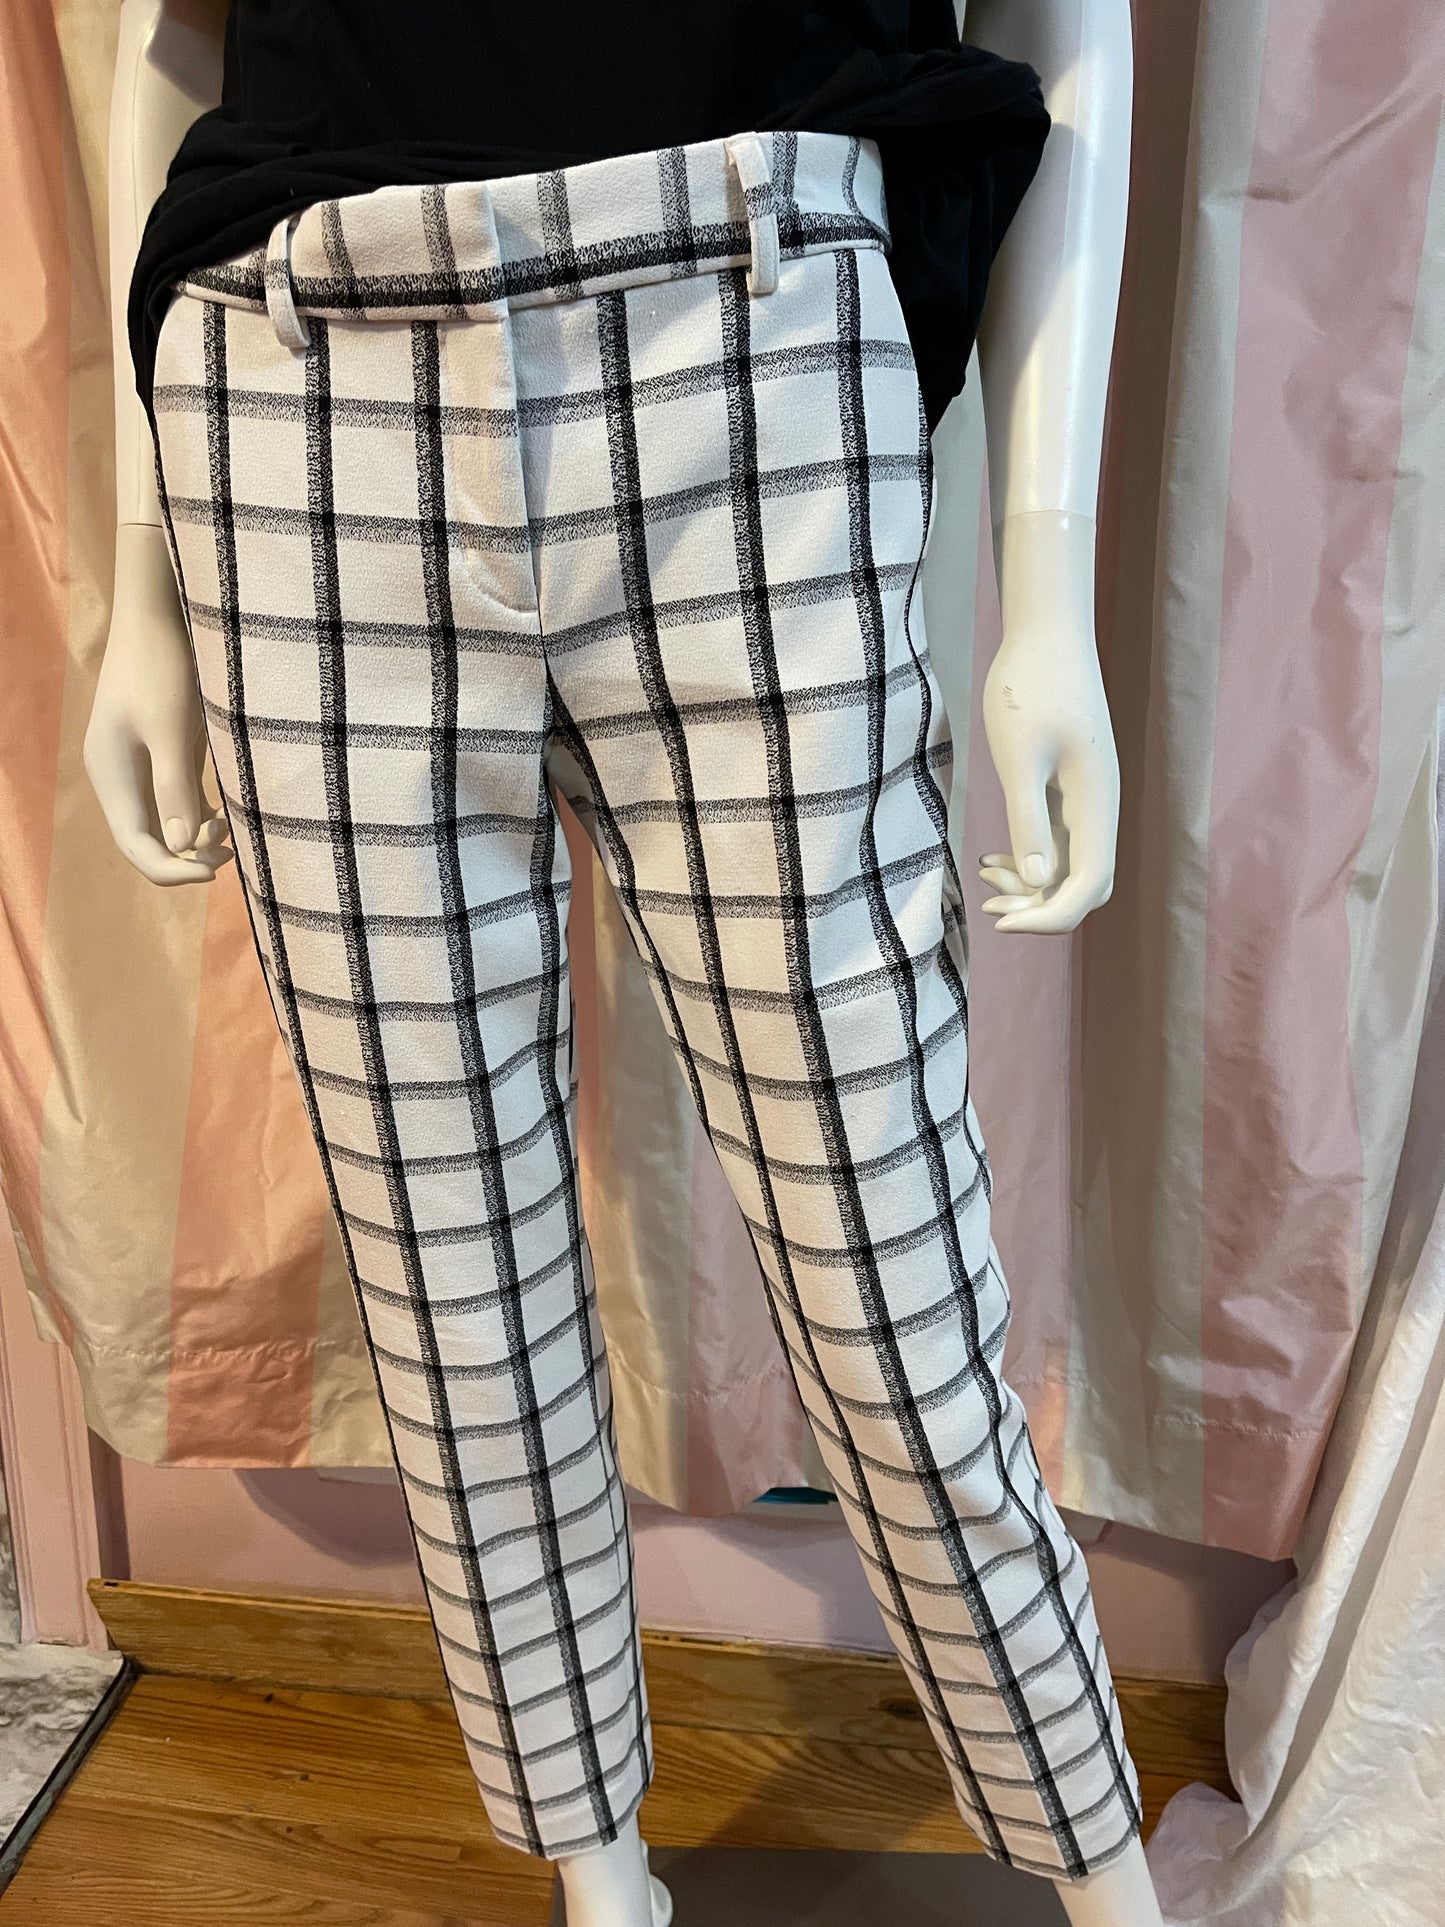 Black Cut Out Large Tee Shirt with White Plaid Trousers